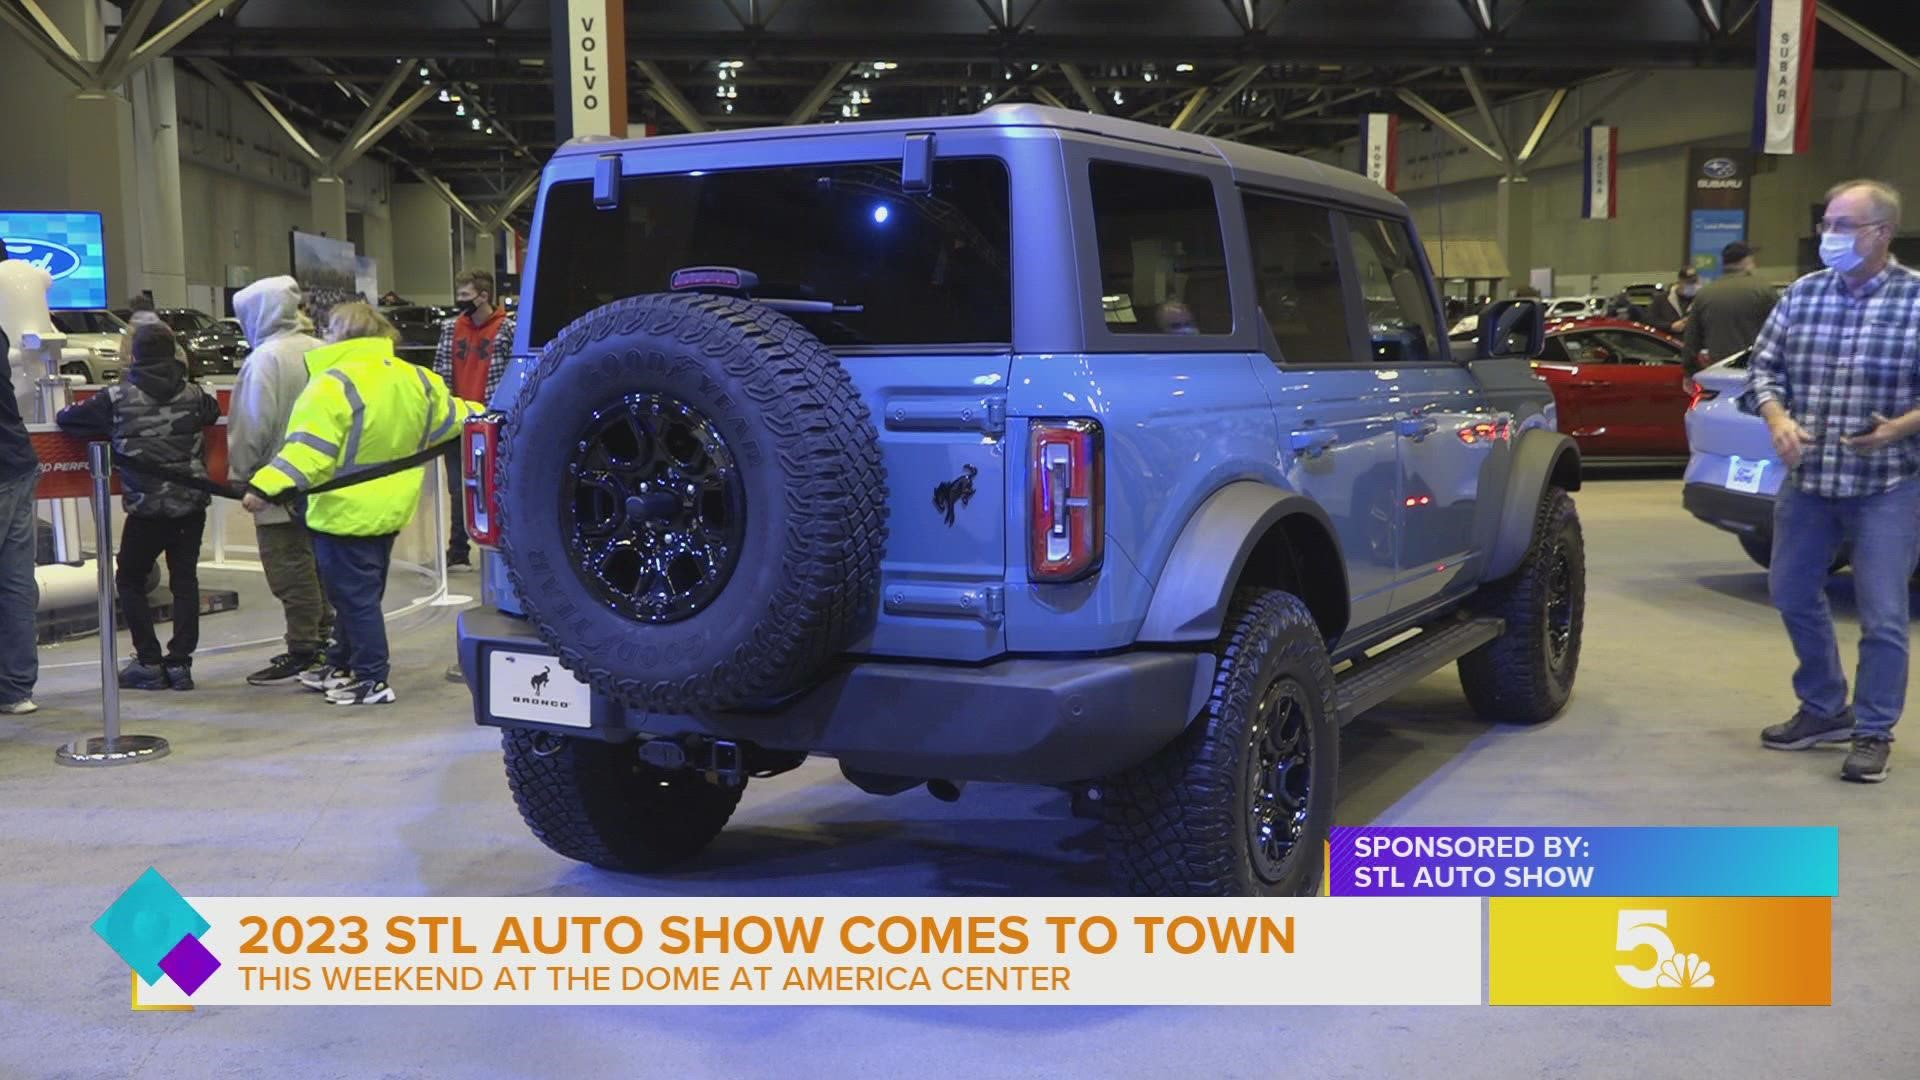 Enter to win tickets to STL Auto Show this weekend!